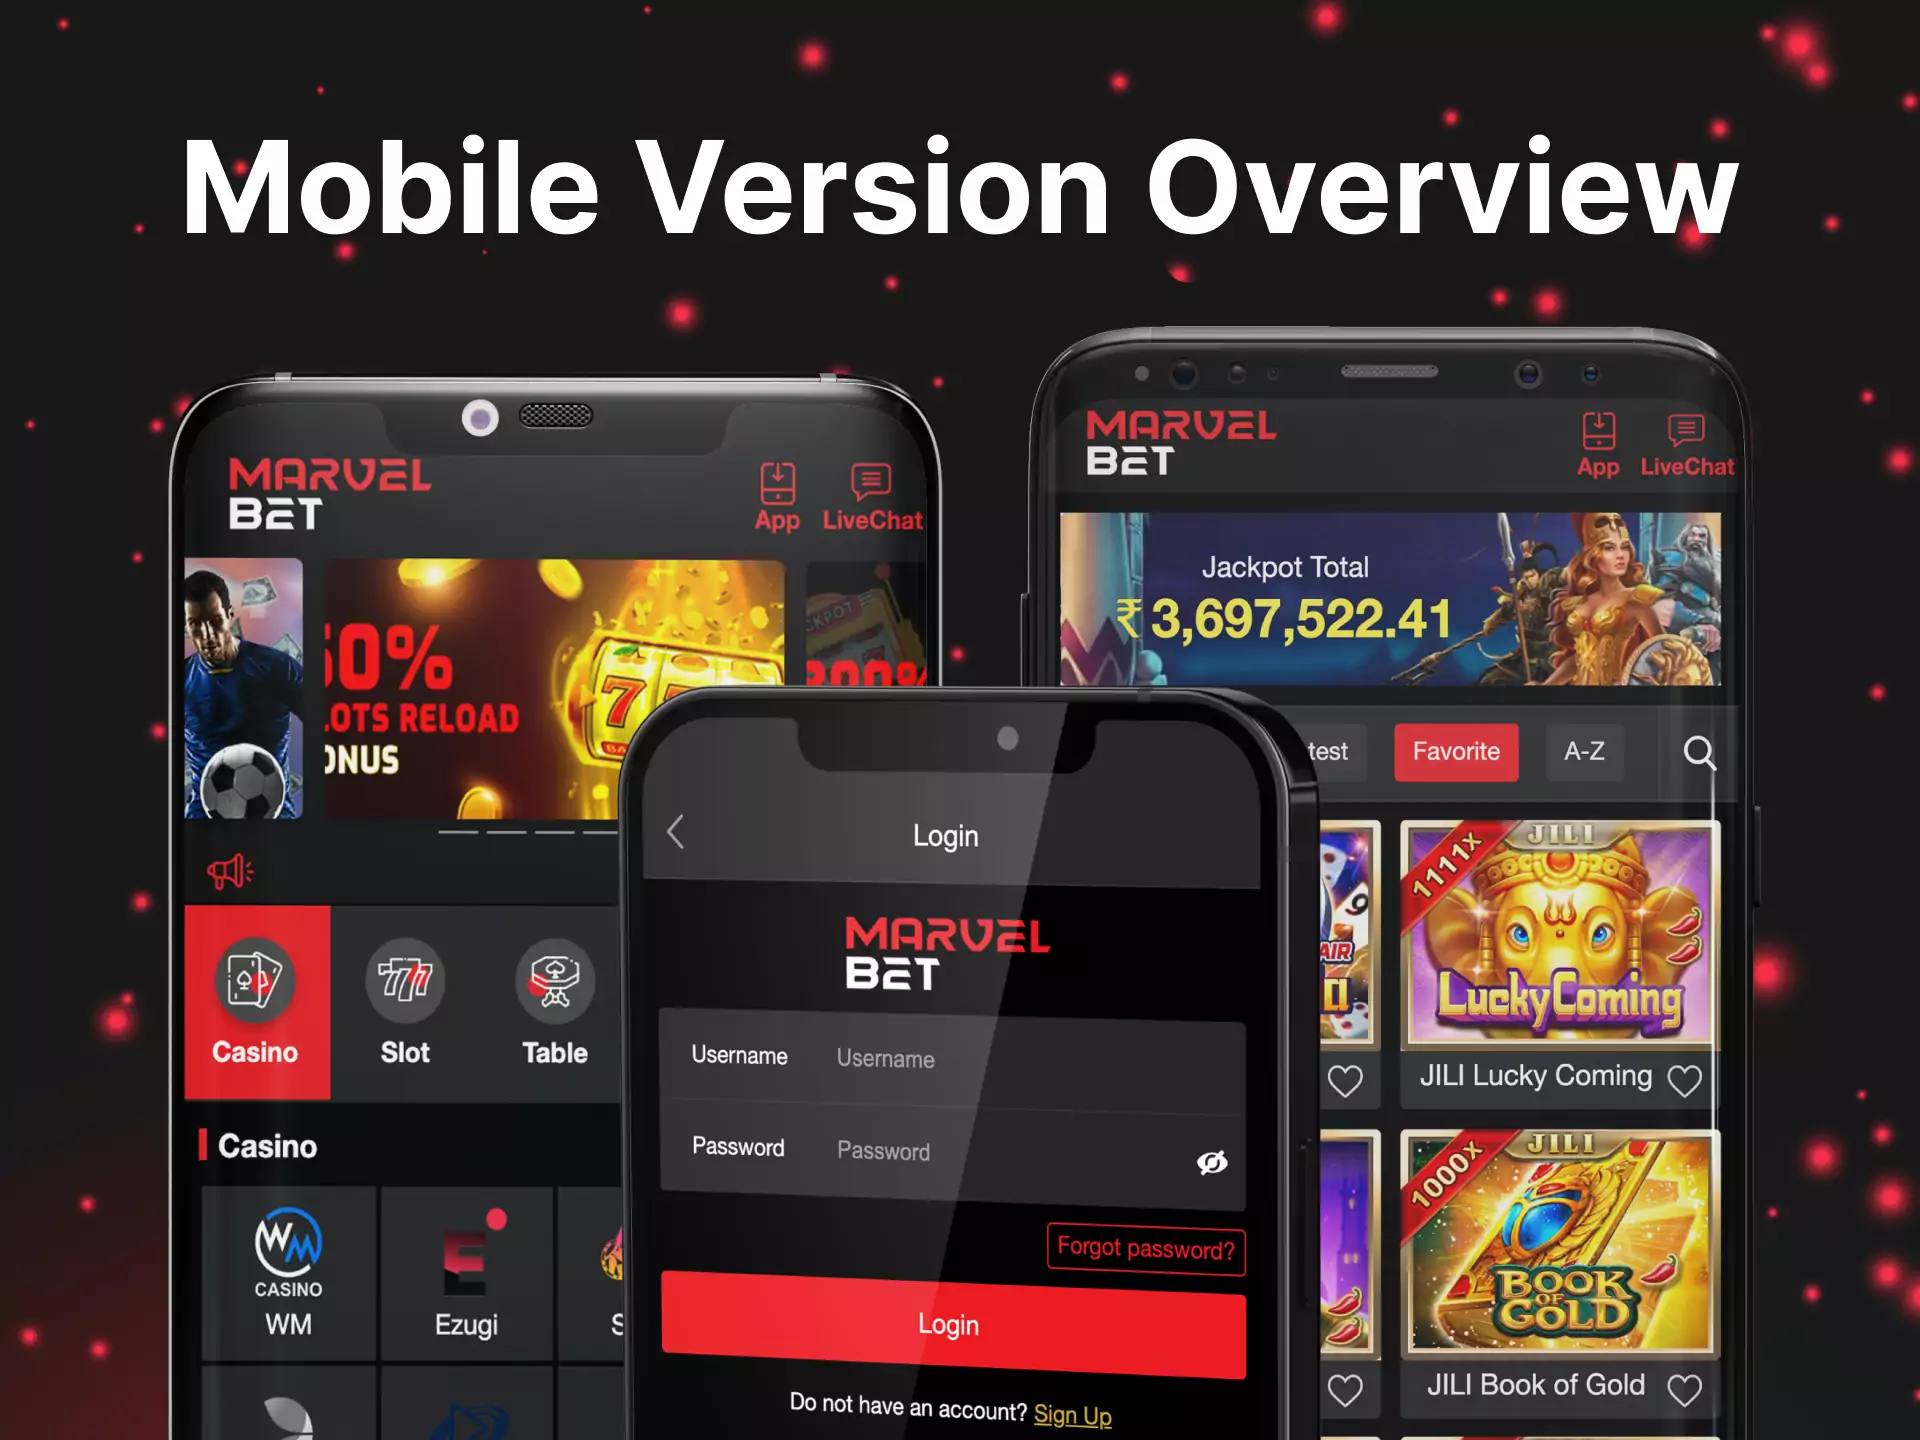 The Marvelbet is a great solution for those who bet on cricket with a smartphone.